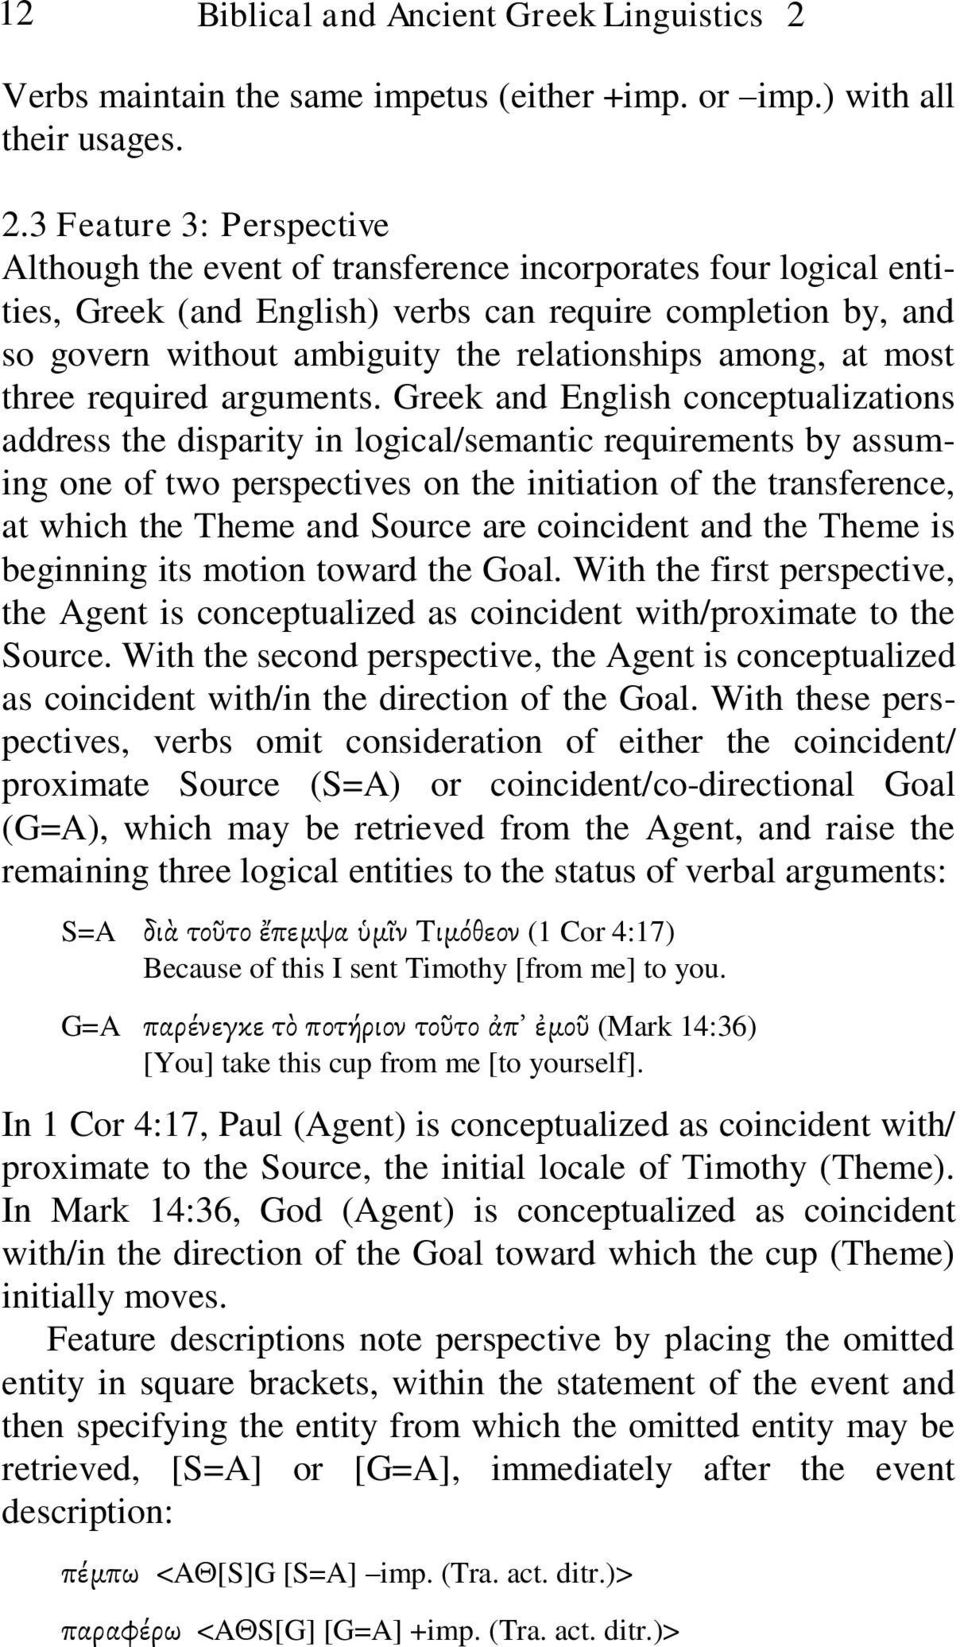 3 Feature 3: Perspective Although the event of transference incorporates four logical entities, Greek (and English) verbs can require completion by, and so govern without ambiguity the relationships